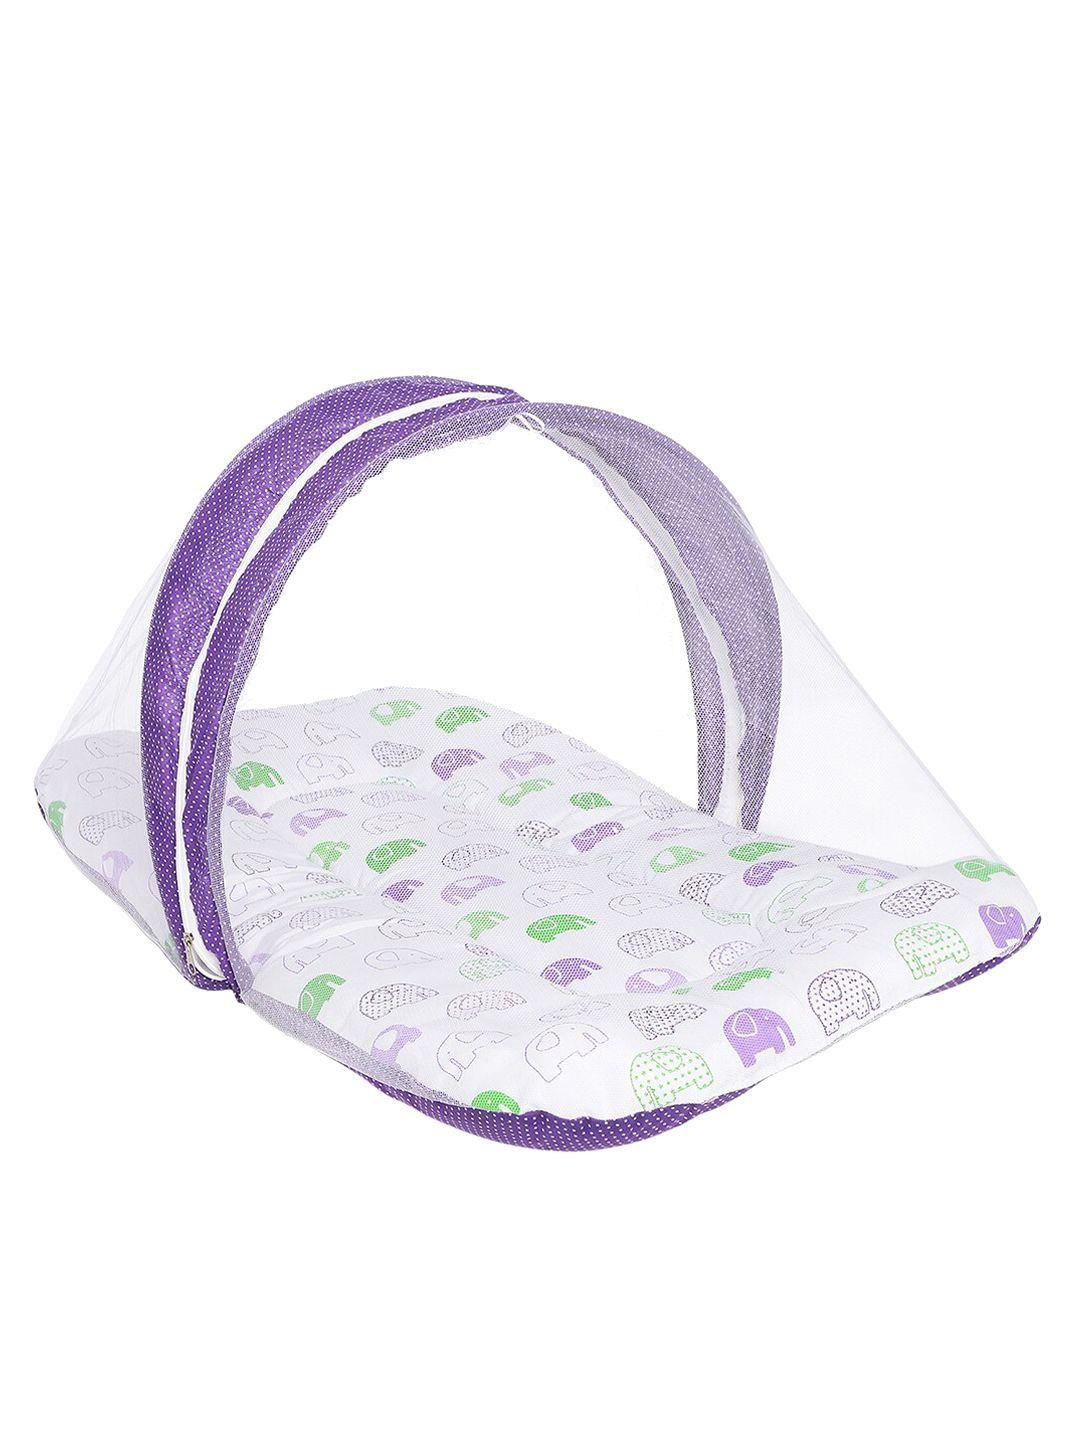 superminis infants white & purple printed bedding set with mosquito net